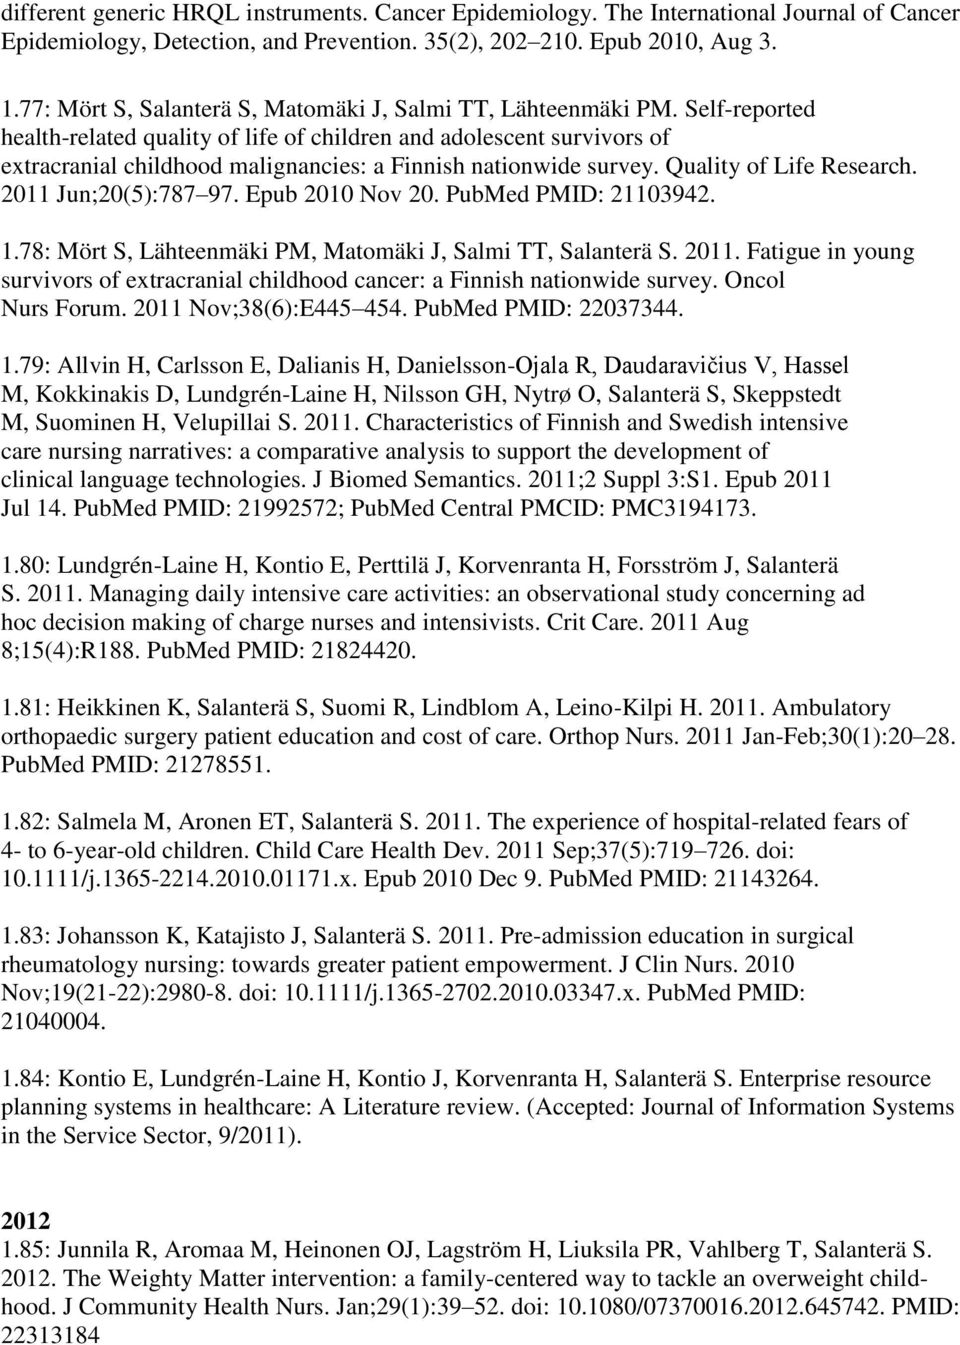 Self-reported health-related quality of life of children and adolescent survivors of extracranial childhood malignancies: a Finnish nationwide survey. Quality of Life Research. 2011 Jun;20(5):787 97.